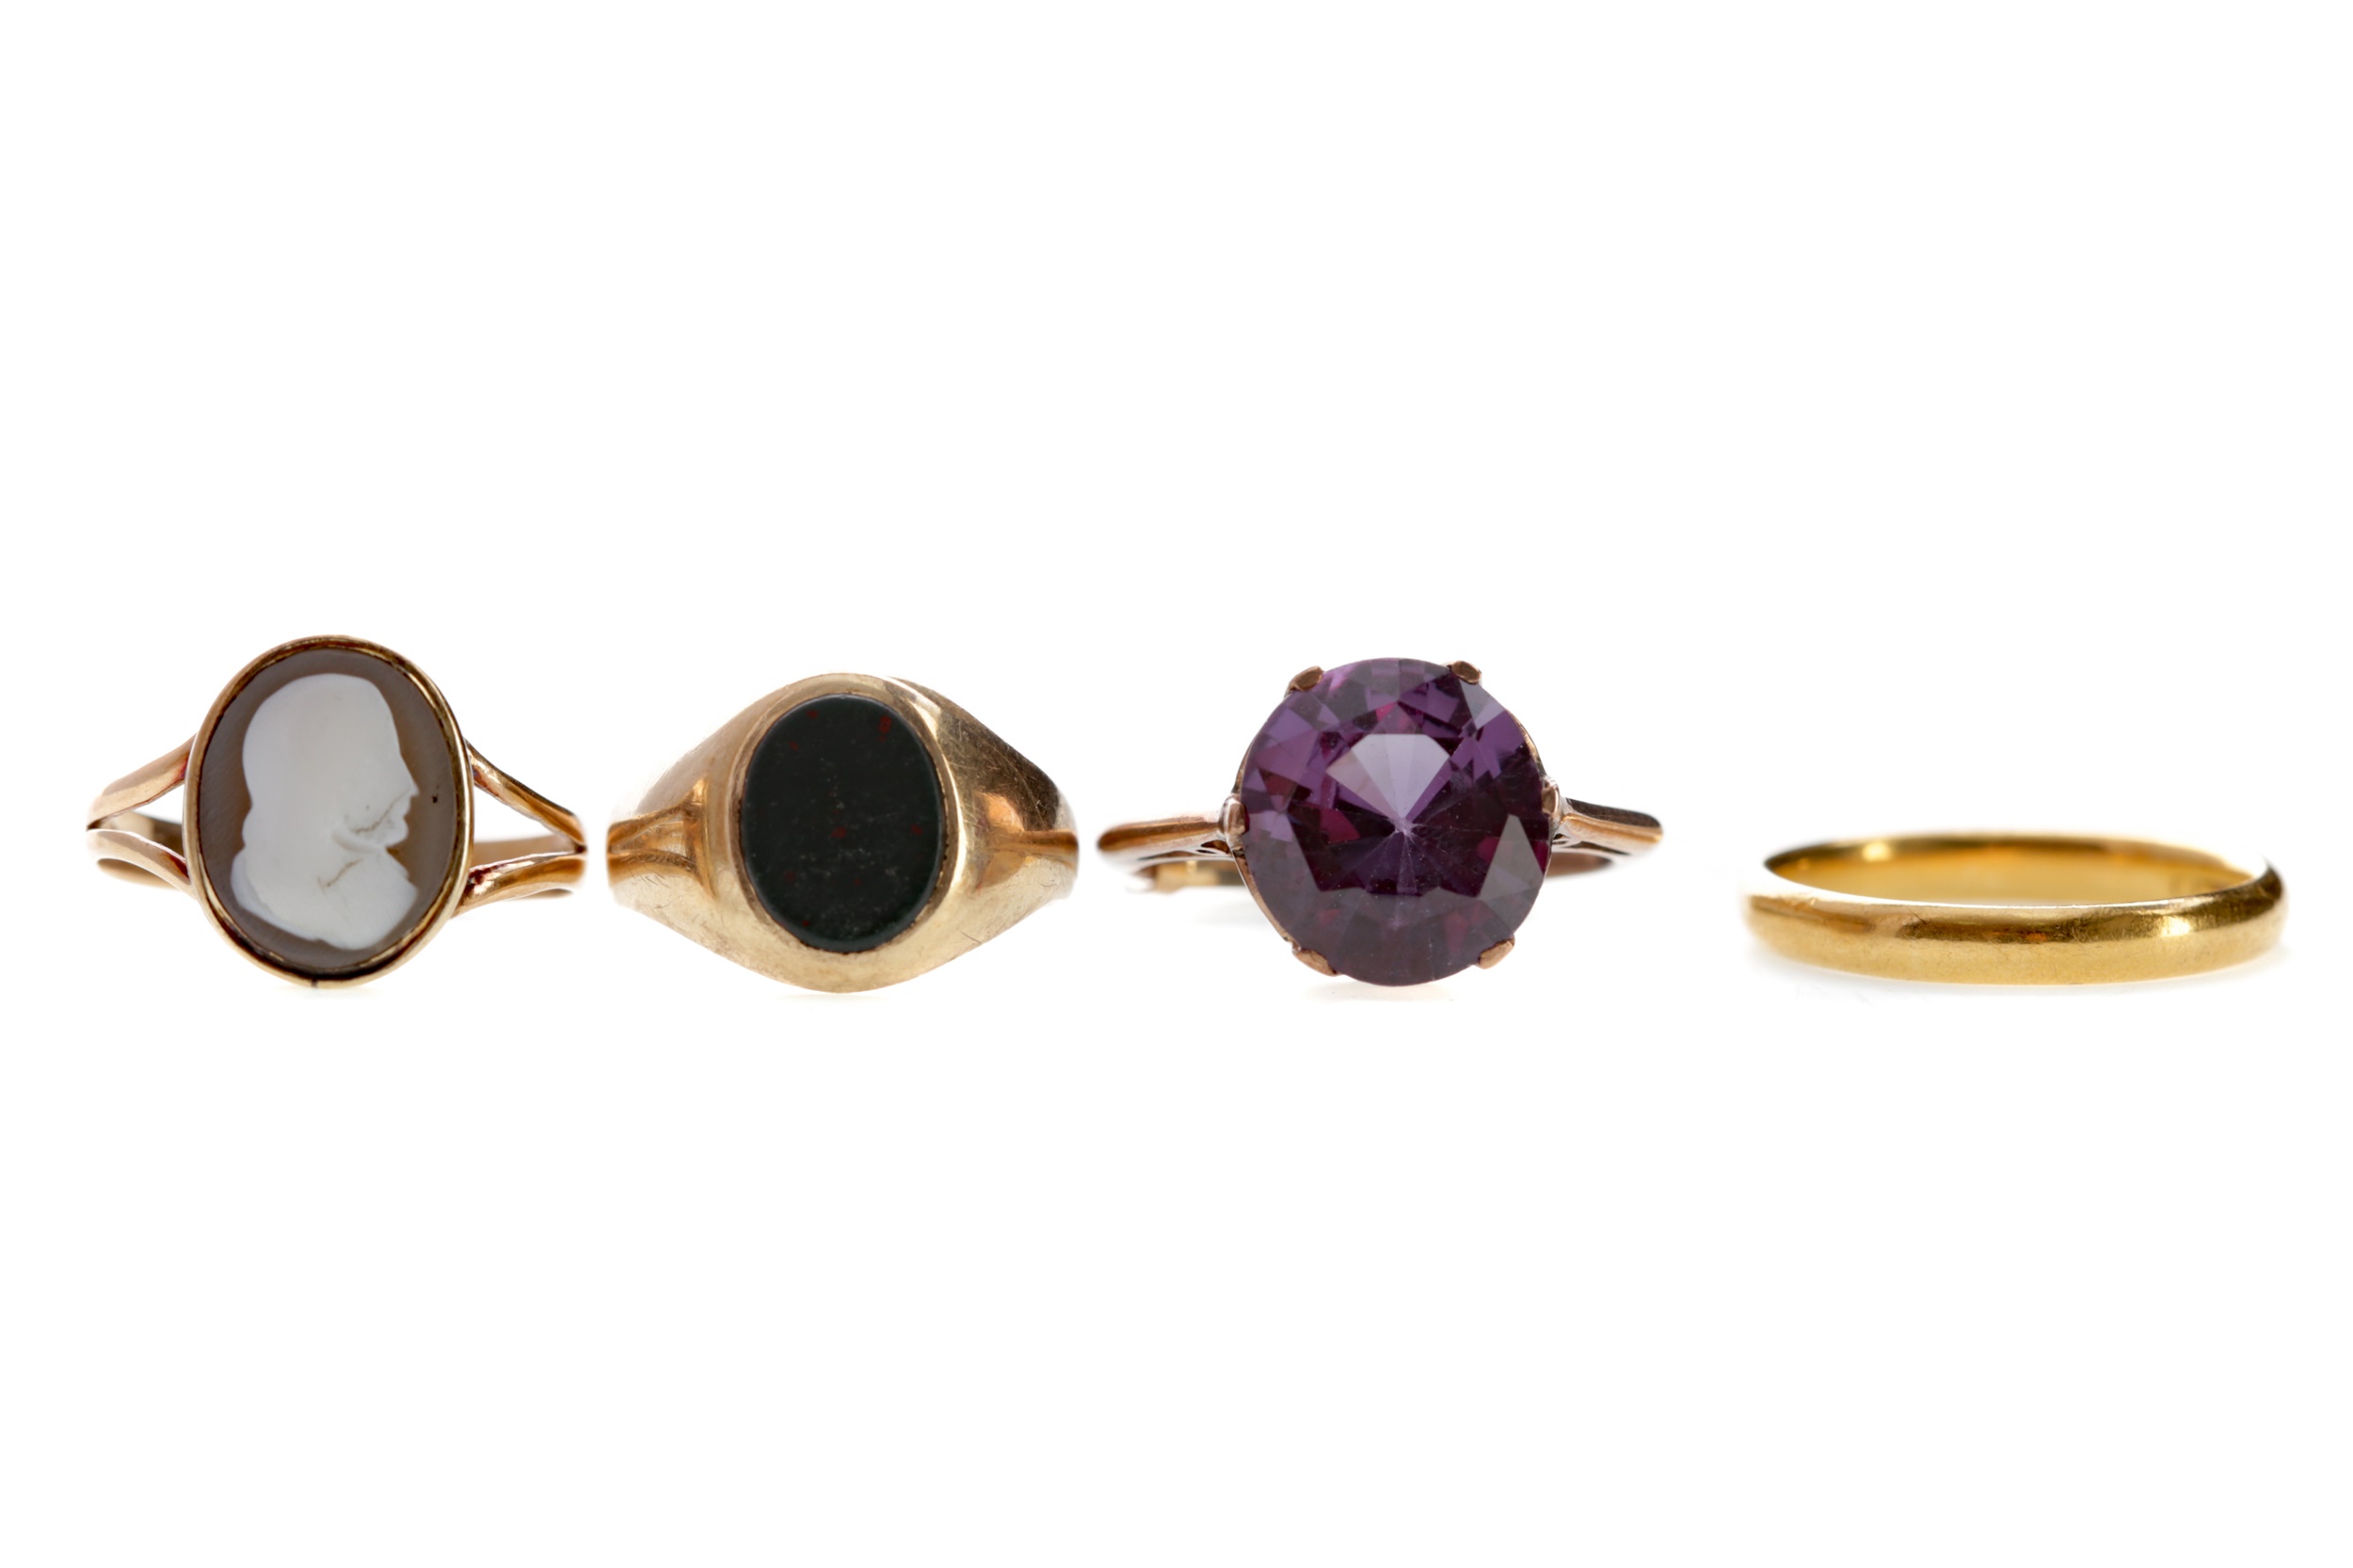 A WEDDING RING, BLOODSTONE AGATE RING, PURPLE GEM SET RING AND A CAMEO RING